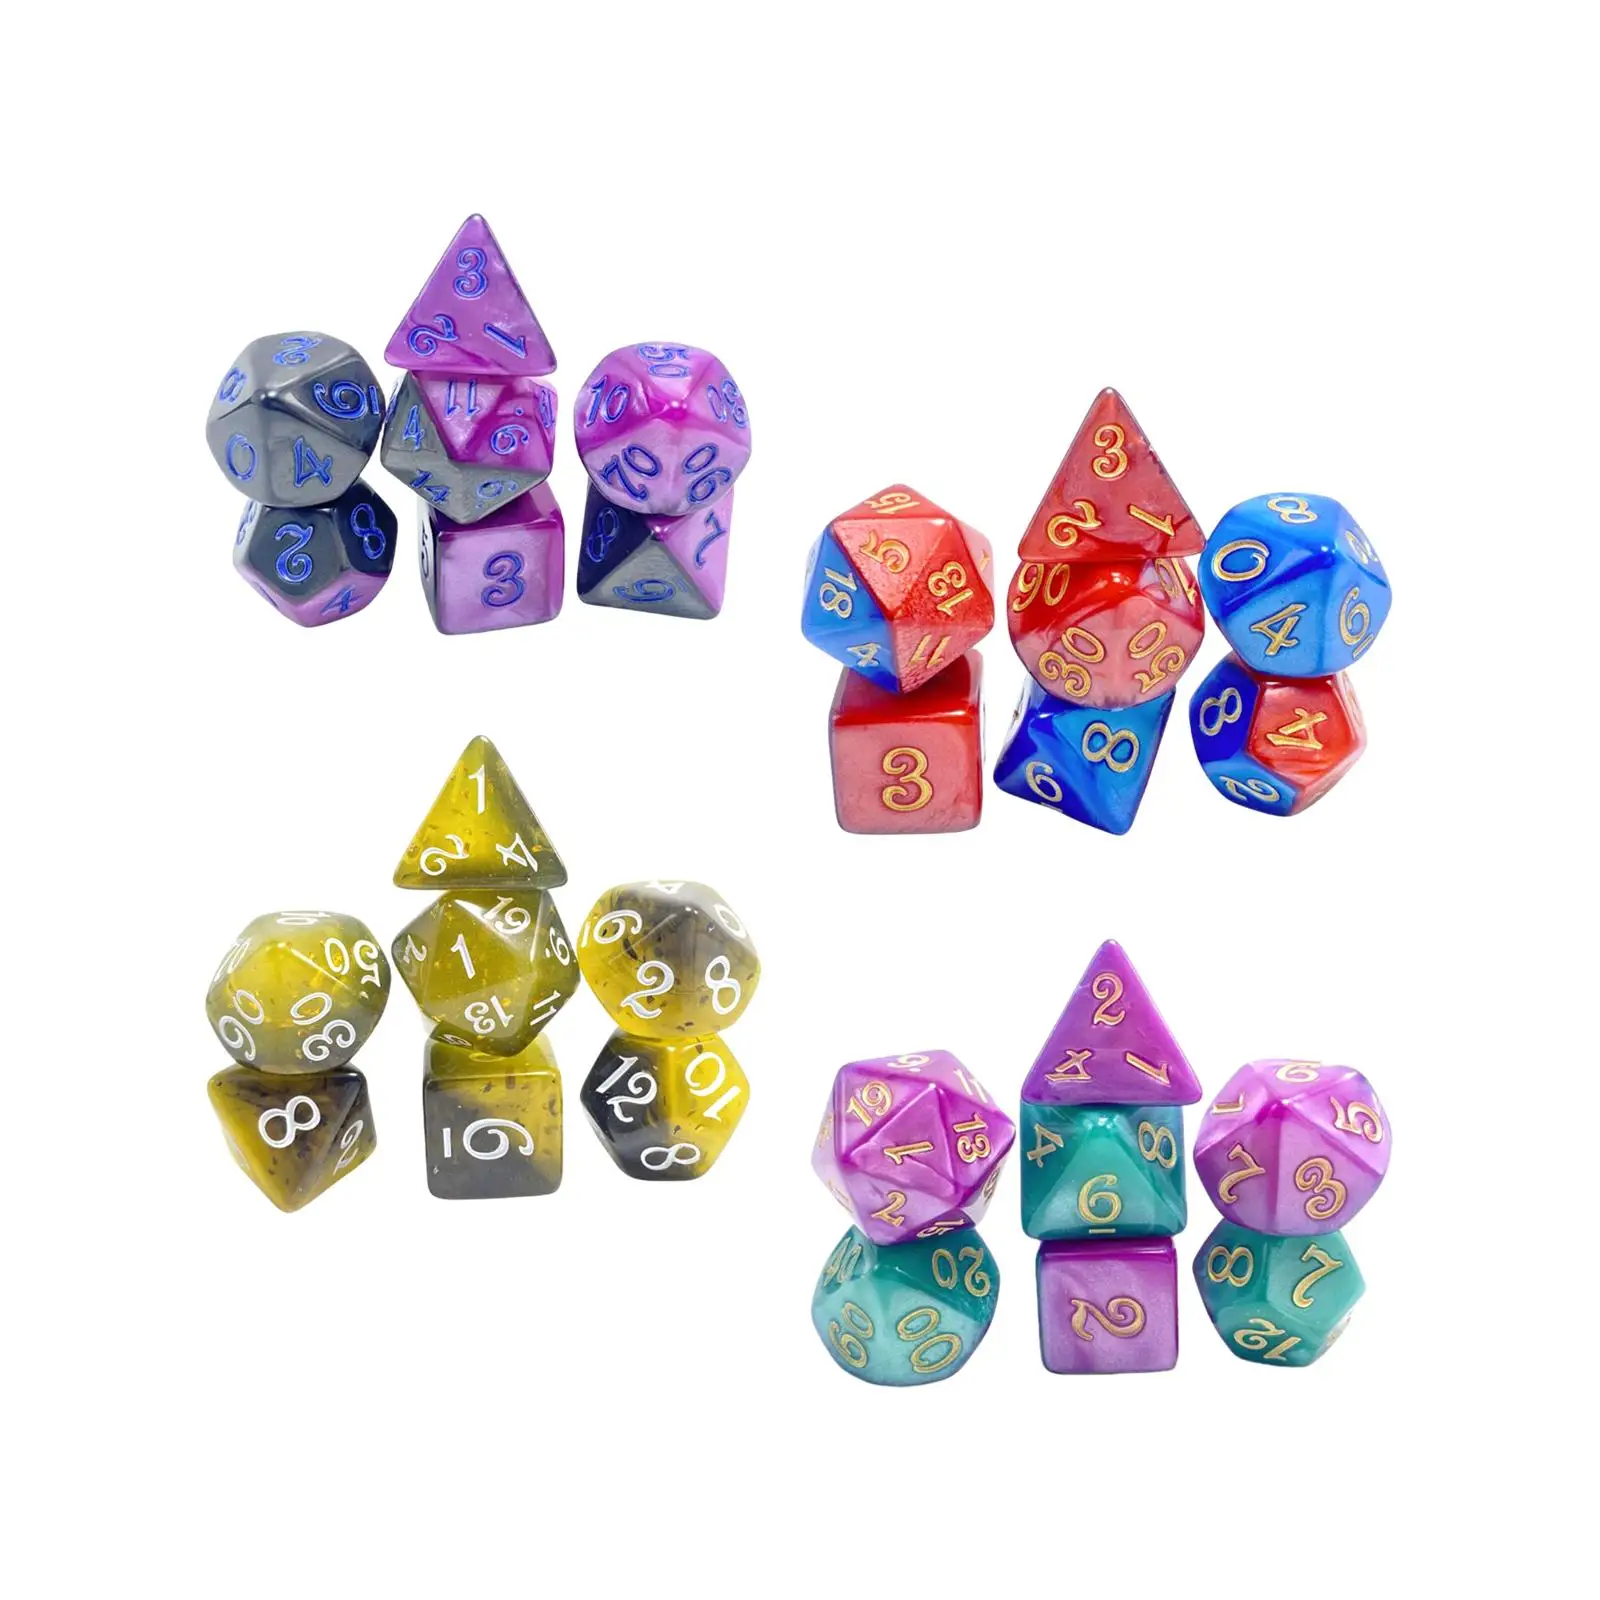 7 Pieces Polyhedral Dice Handmade for Role Playing Games Party Toys Board Game